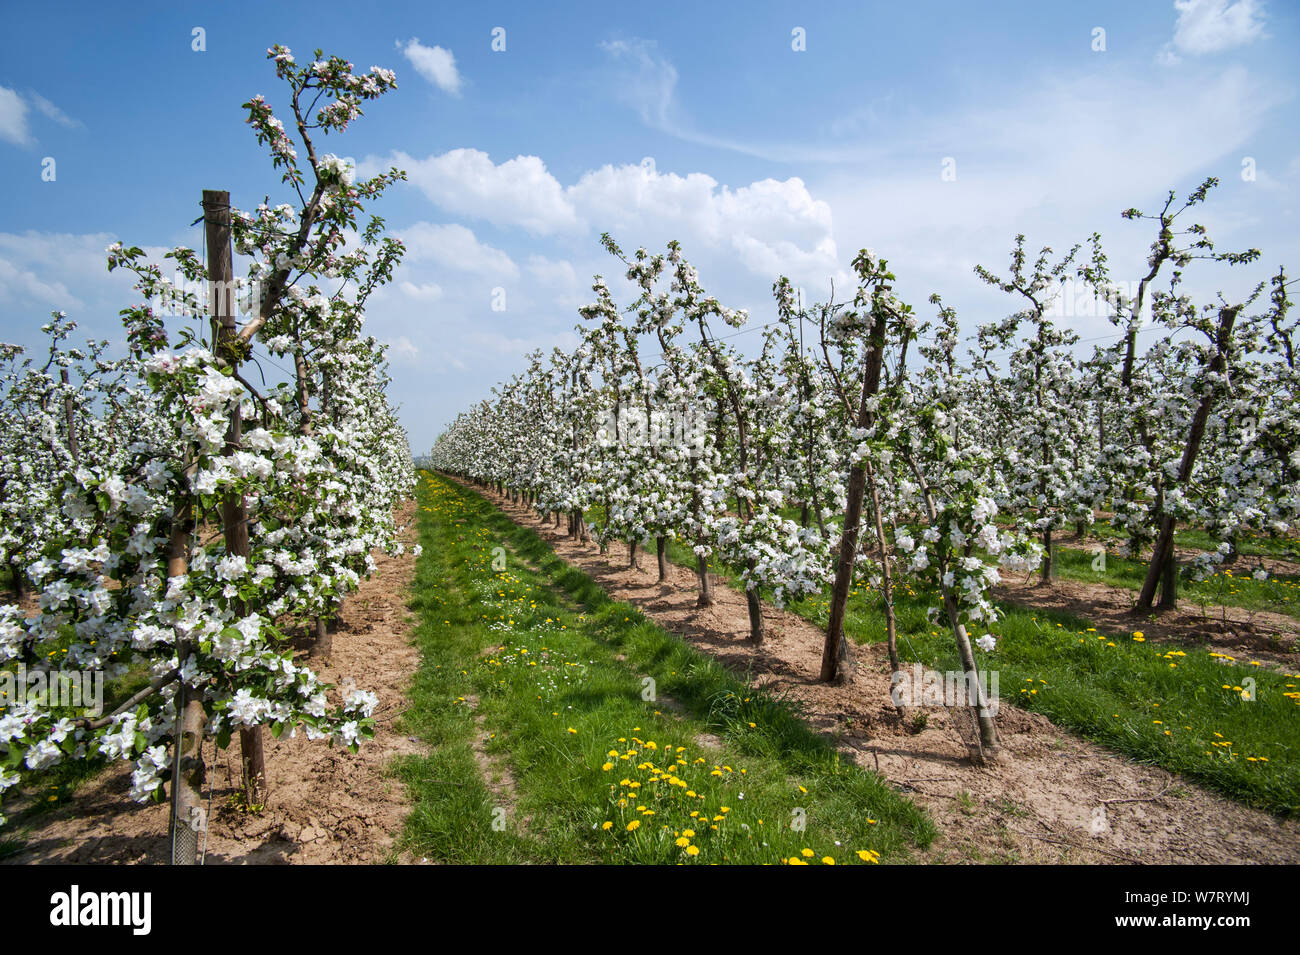 Apple trees (Malus domestica) flowering in orchard in spring, Hesbaye, Belgium. May 2013. Stock Photo